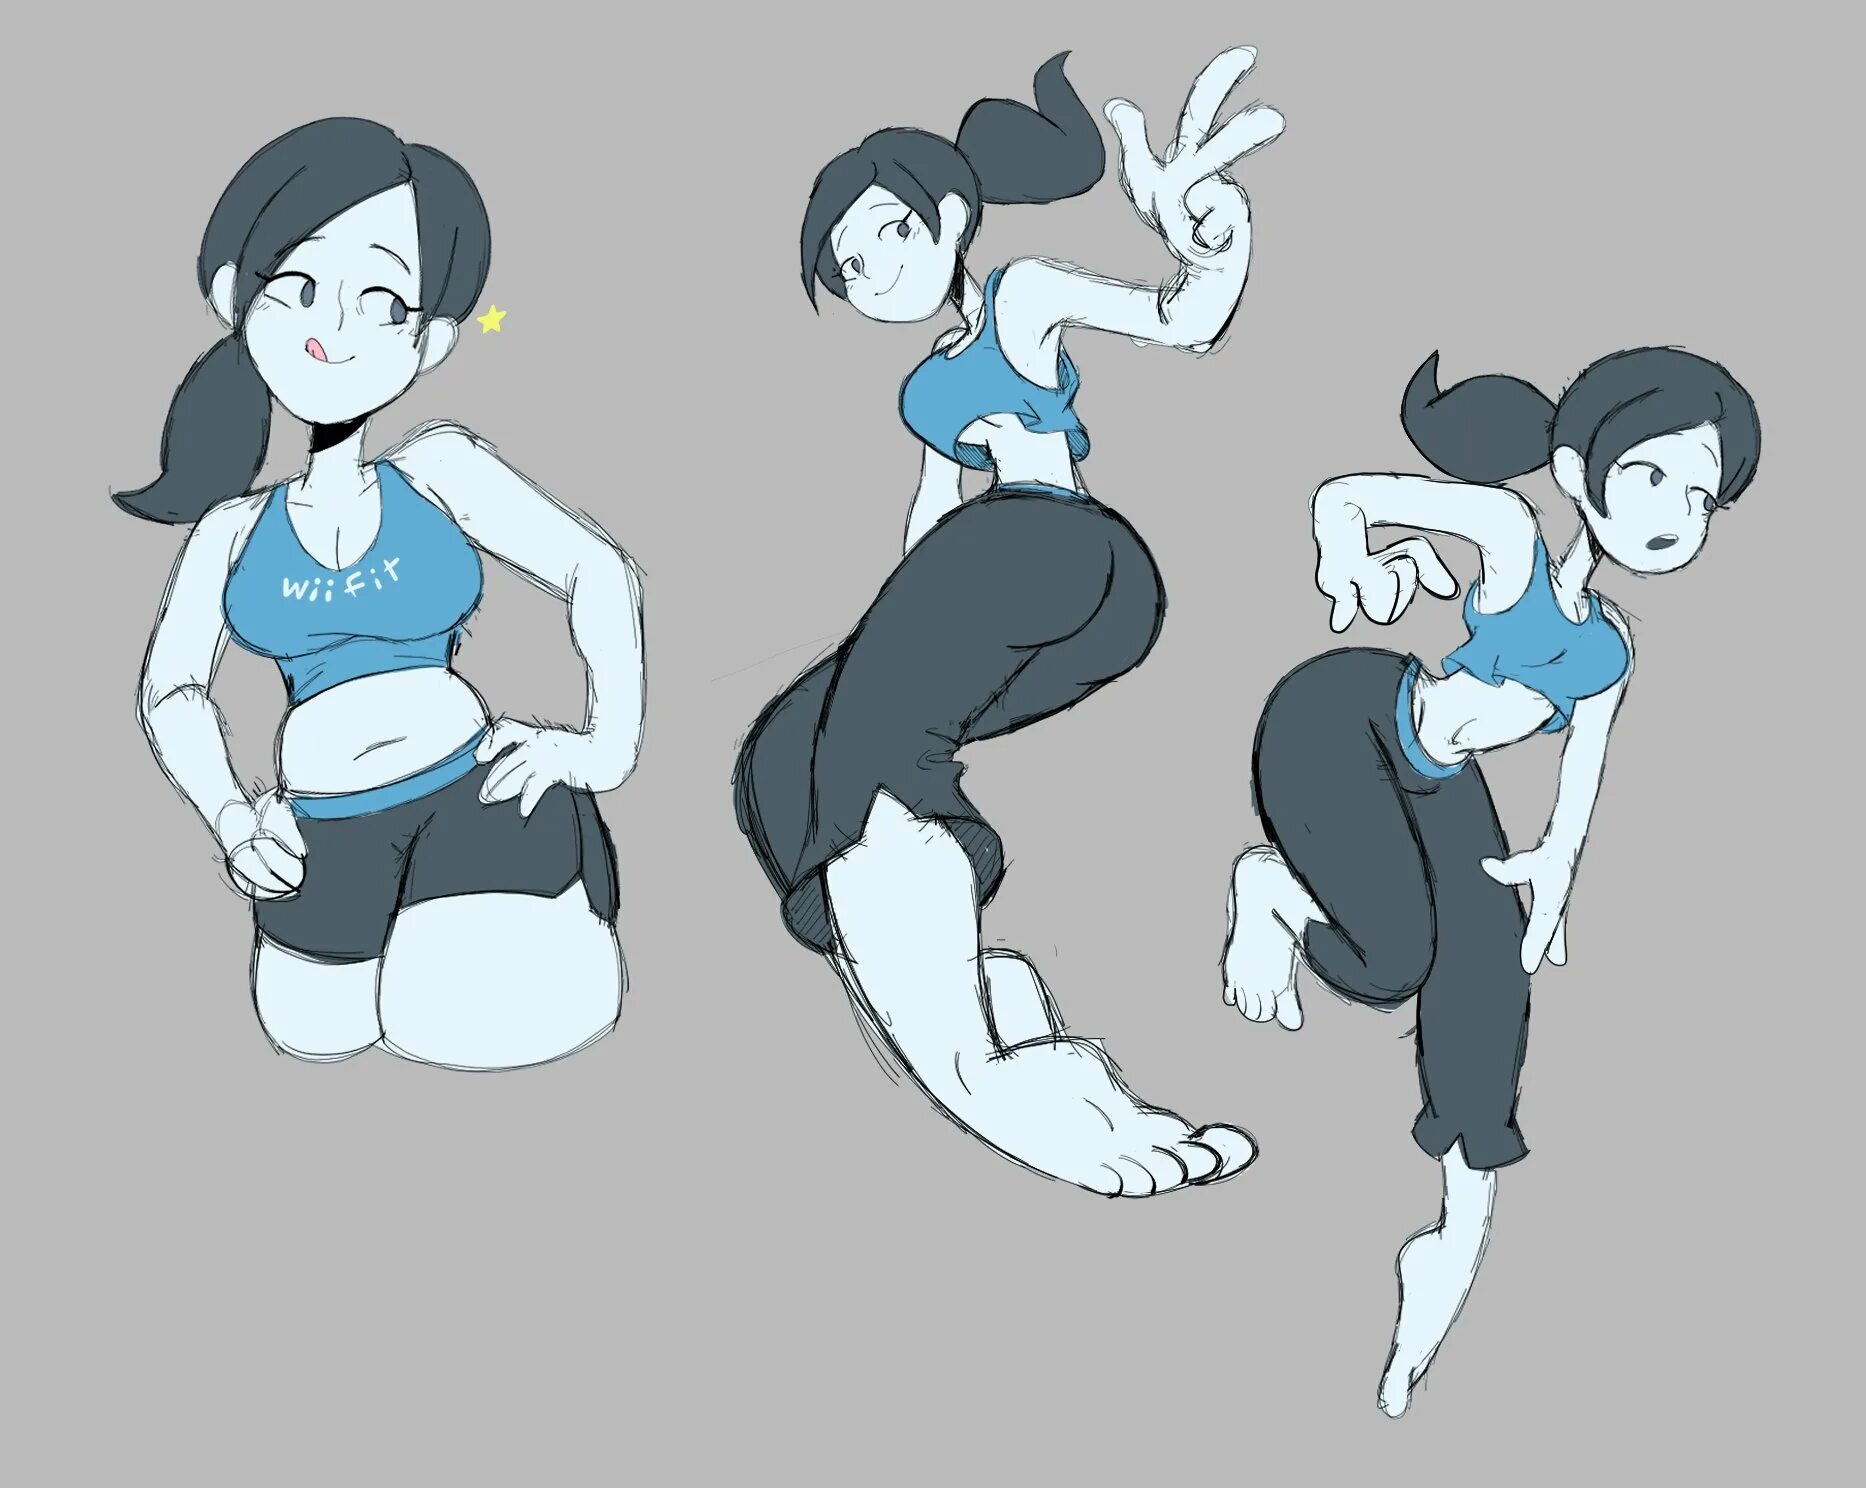 Wii fit. Wii Fit Trainer 34 giant. Wii Fit belly. Wii Fit Trainer 34 giant Vore. Wii Fit Trainer belly.